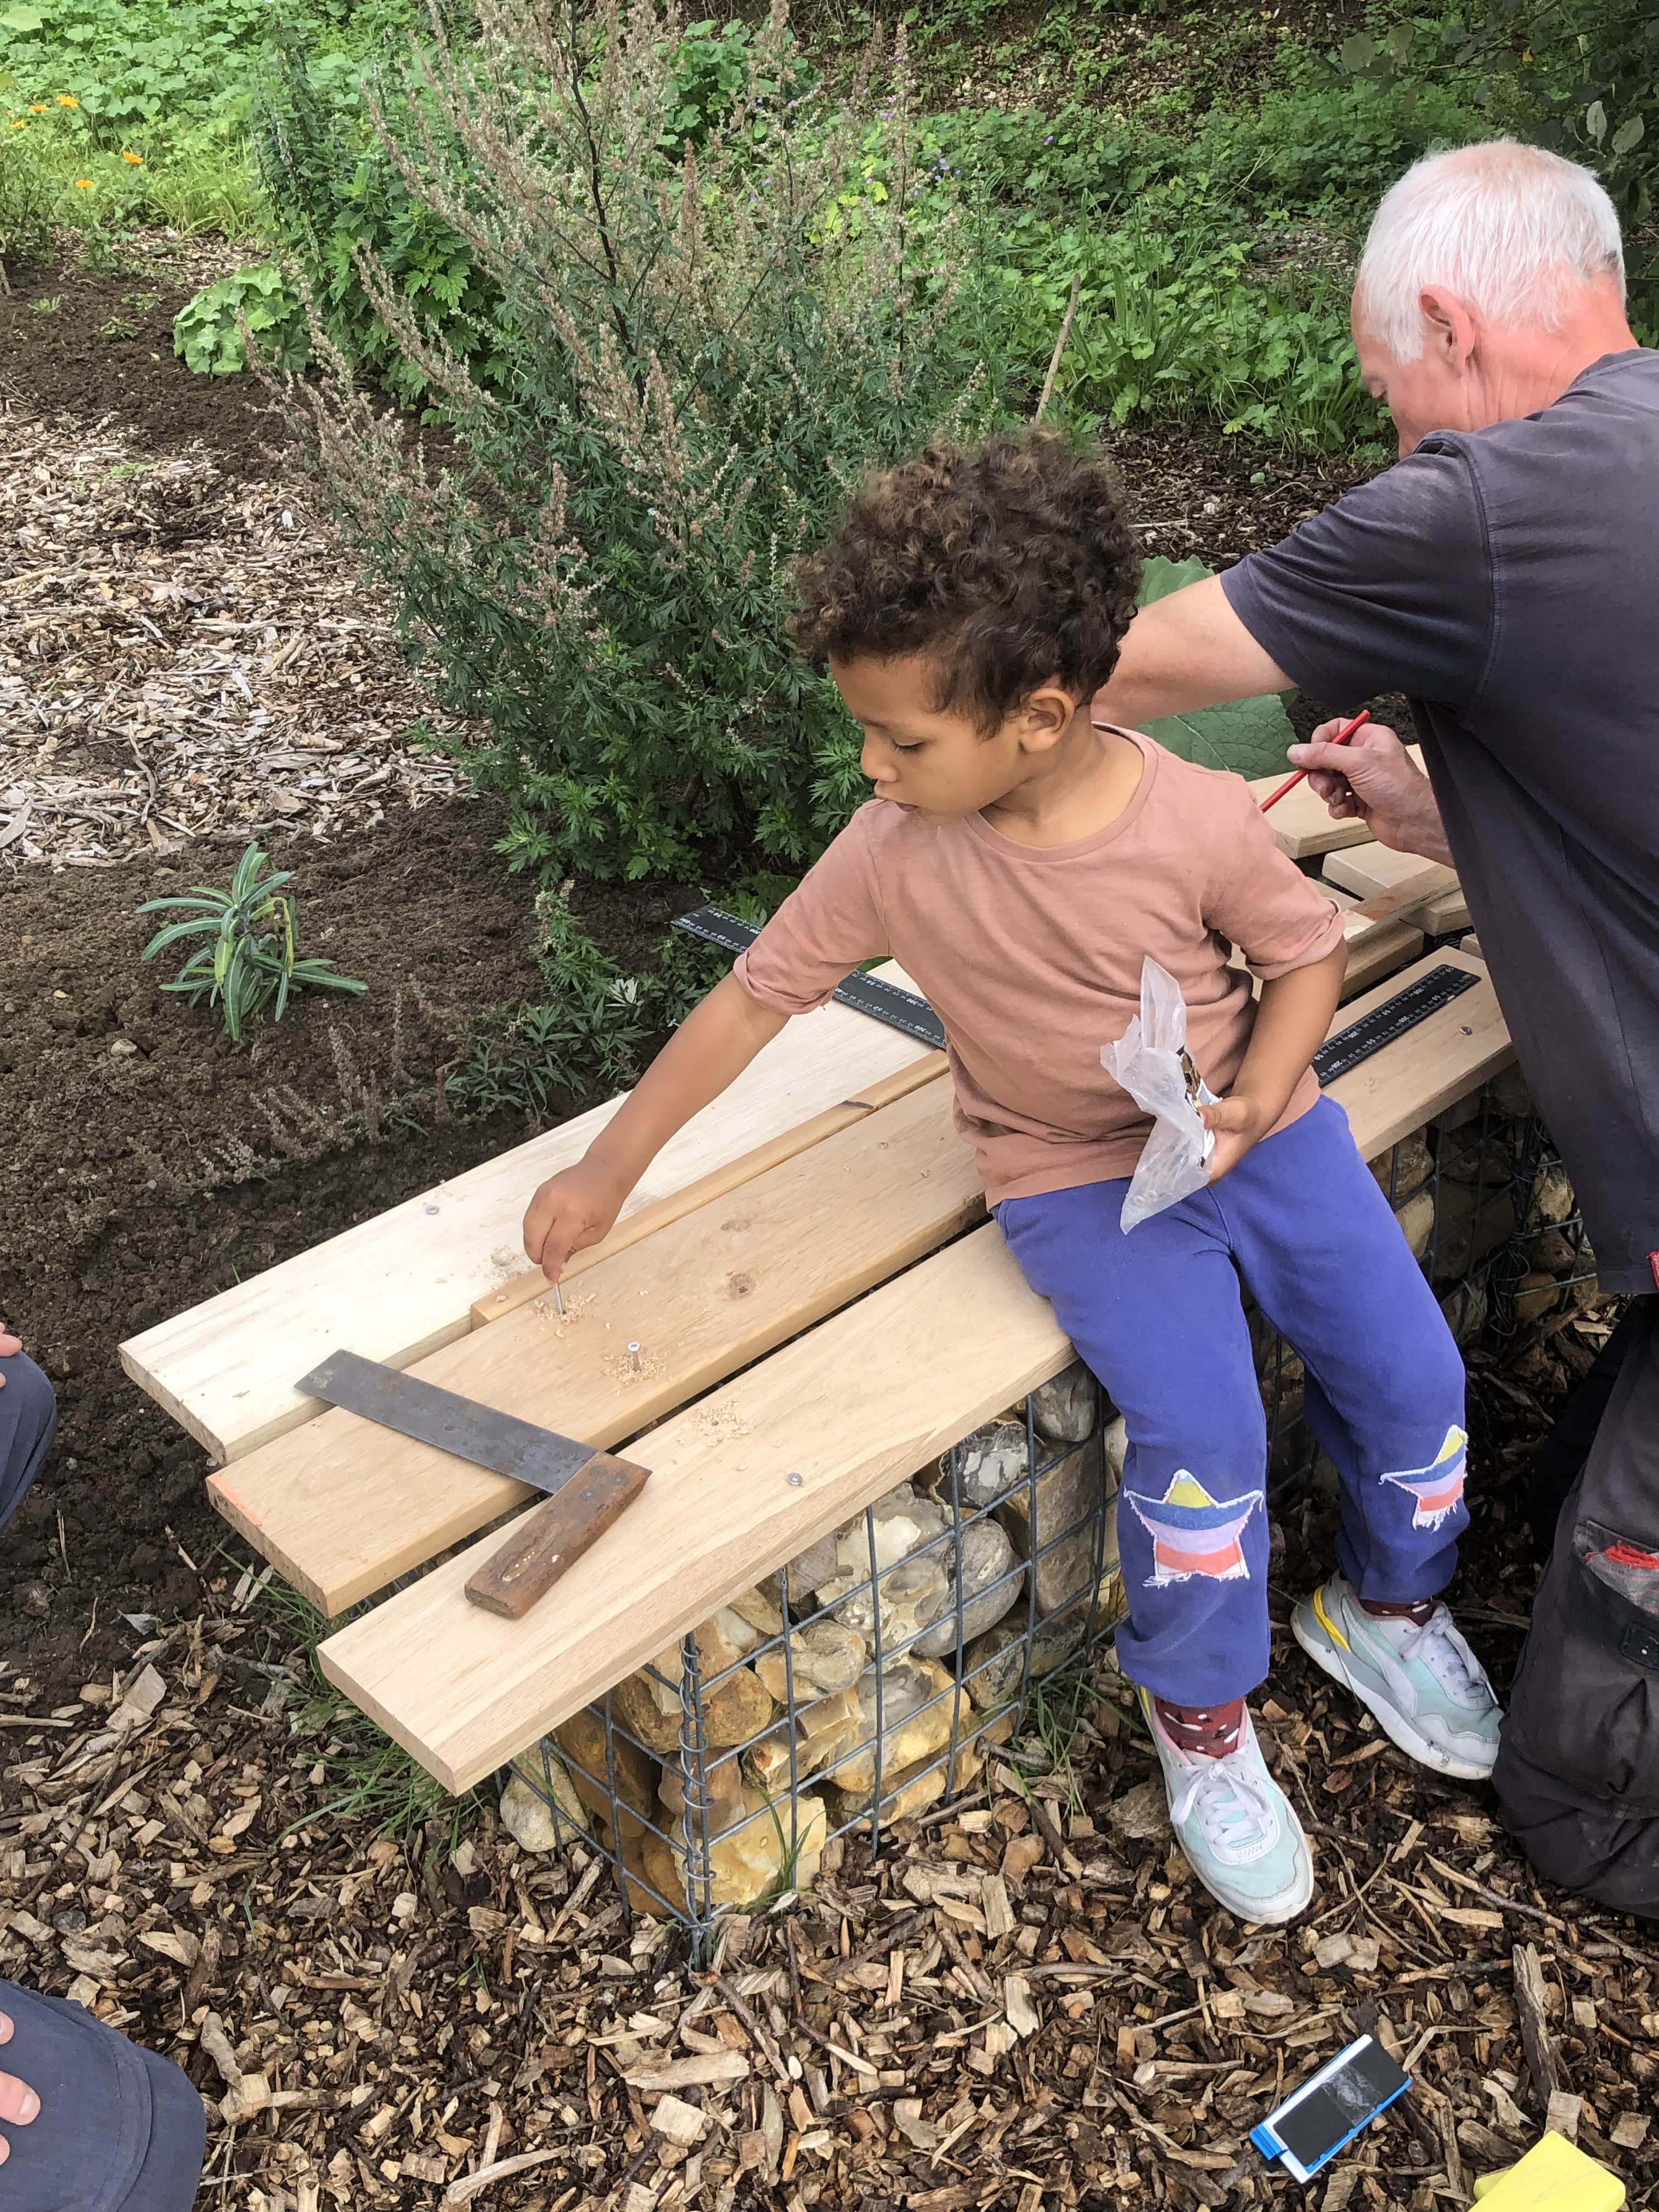 Child helps build bench